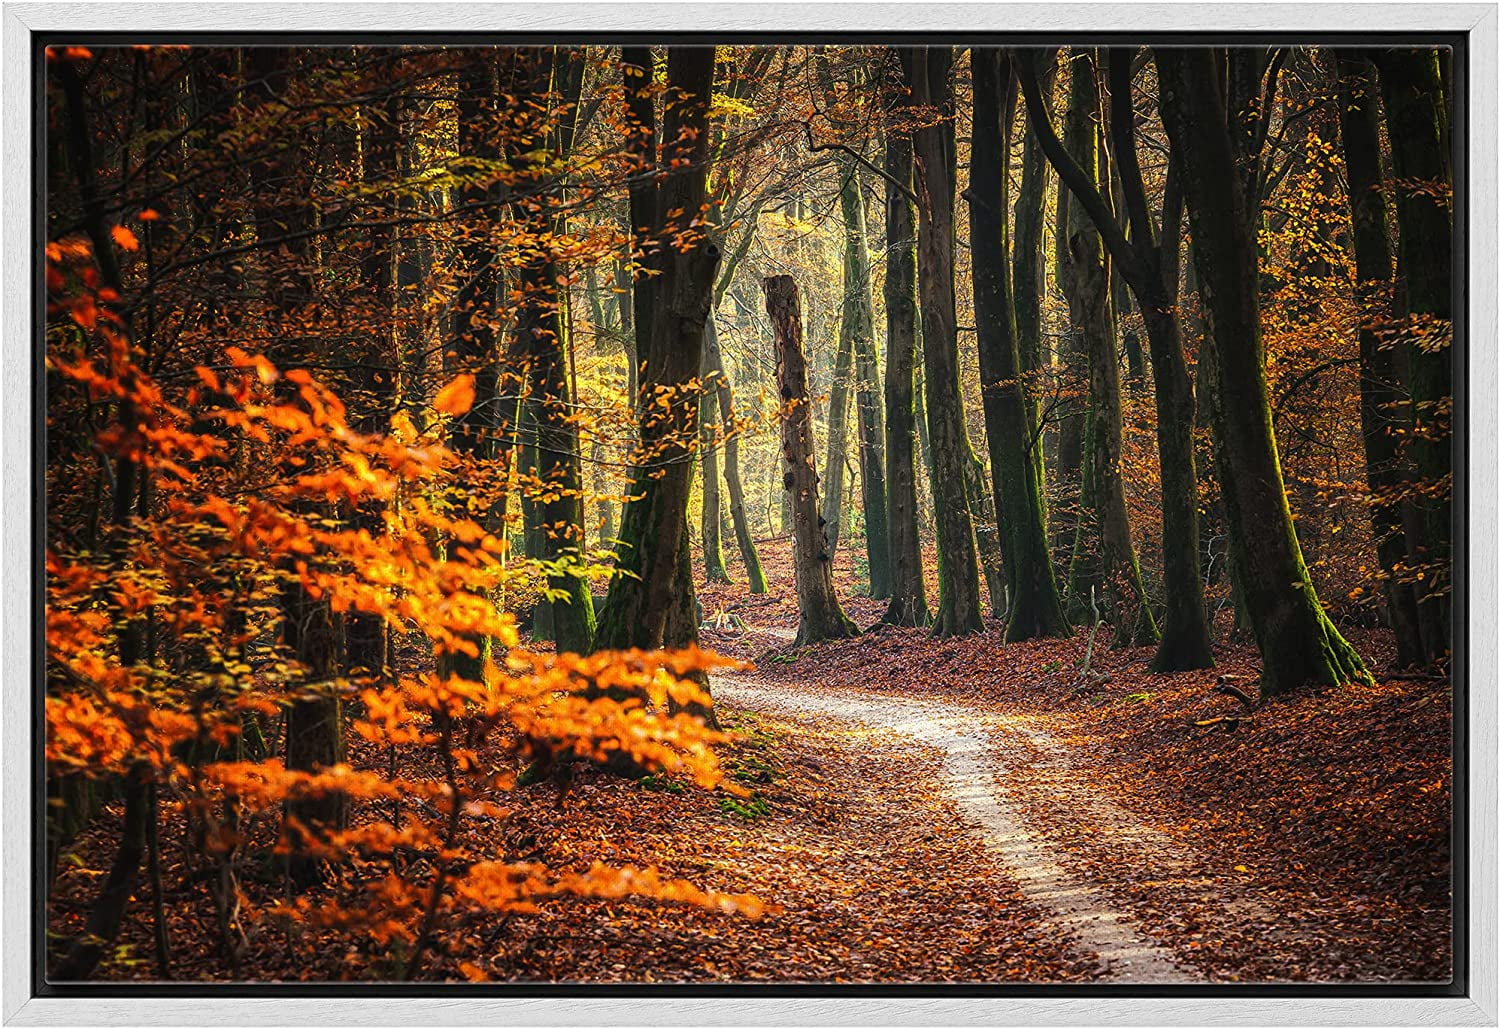 Framed Canvas Print Wall Art Autumn Fall Orange Leaf Forest Tree Trail Nature  Wilderness Photography Realism Earth Scenery Scenic Landscape for Living  Room, Bedroom, Office 16